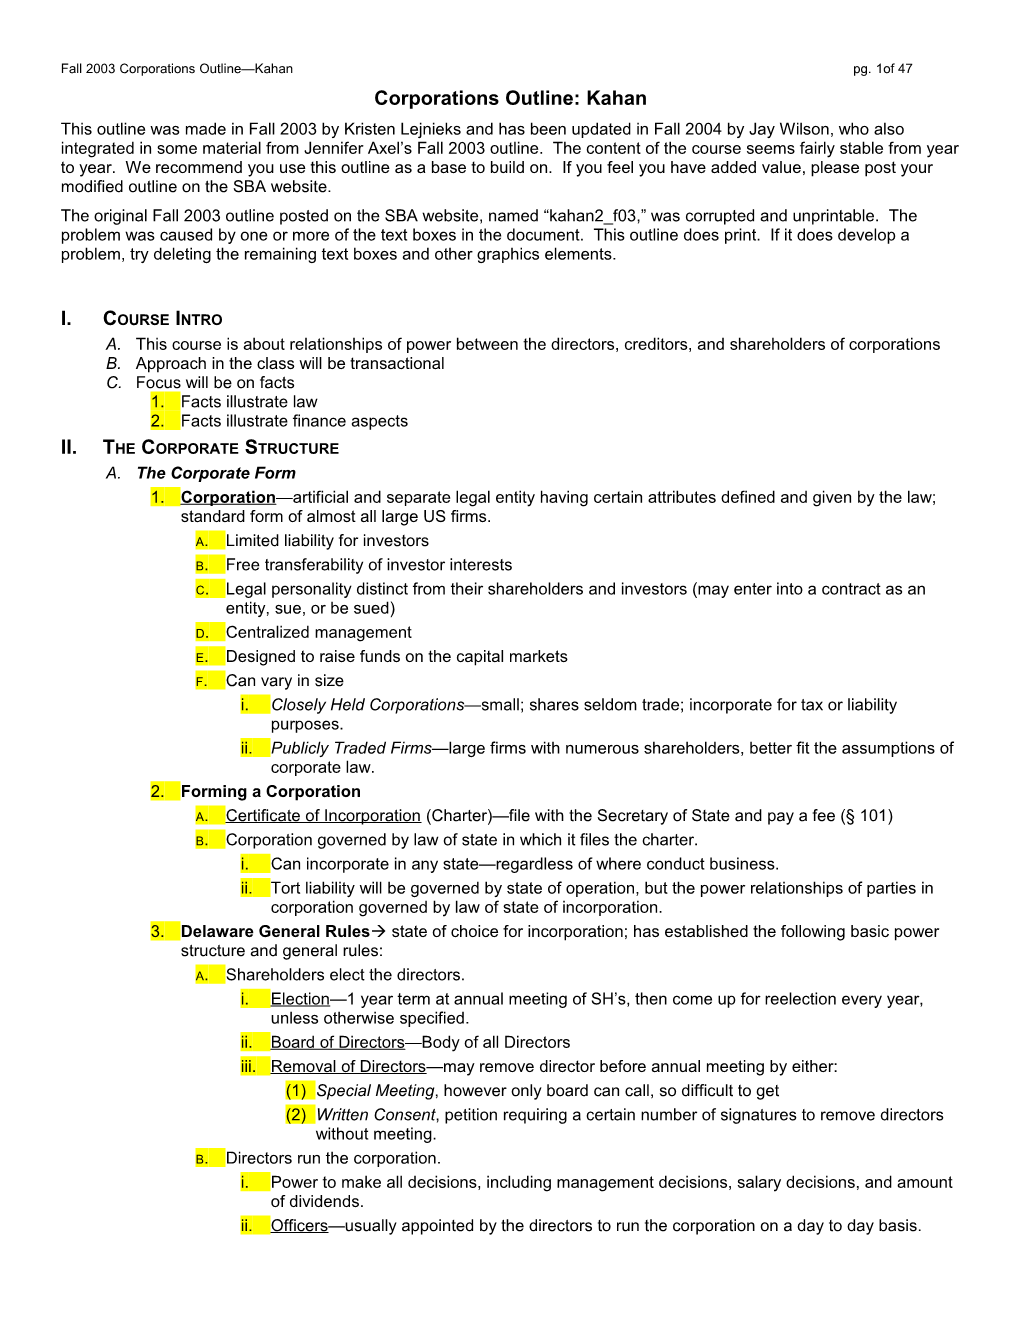 Fall 2003 Corporations Outline Kahan Pg. 1Of 42